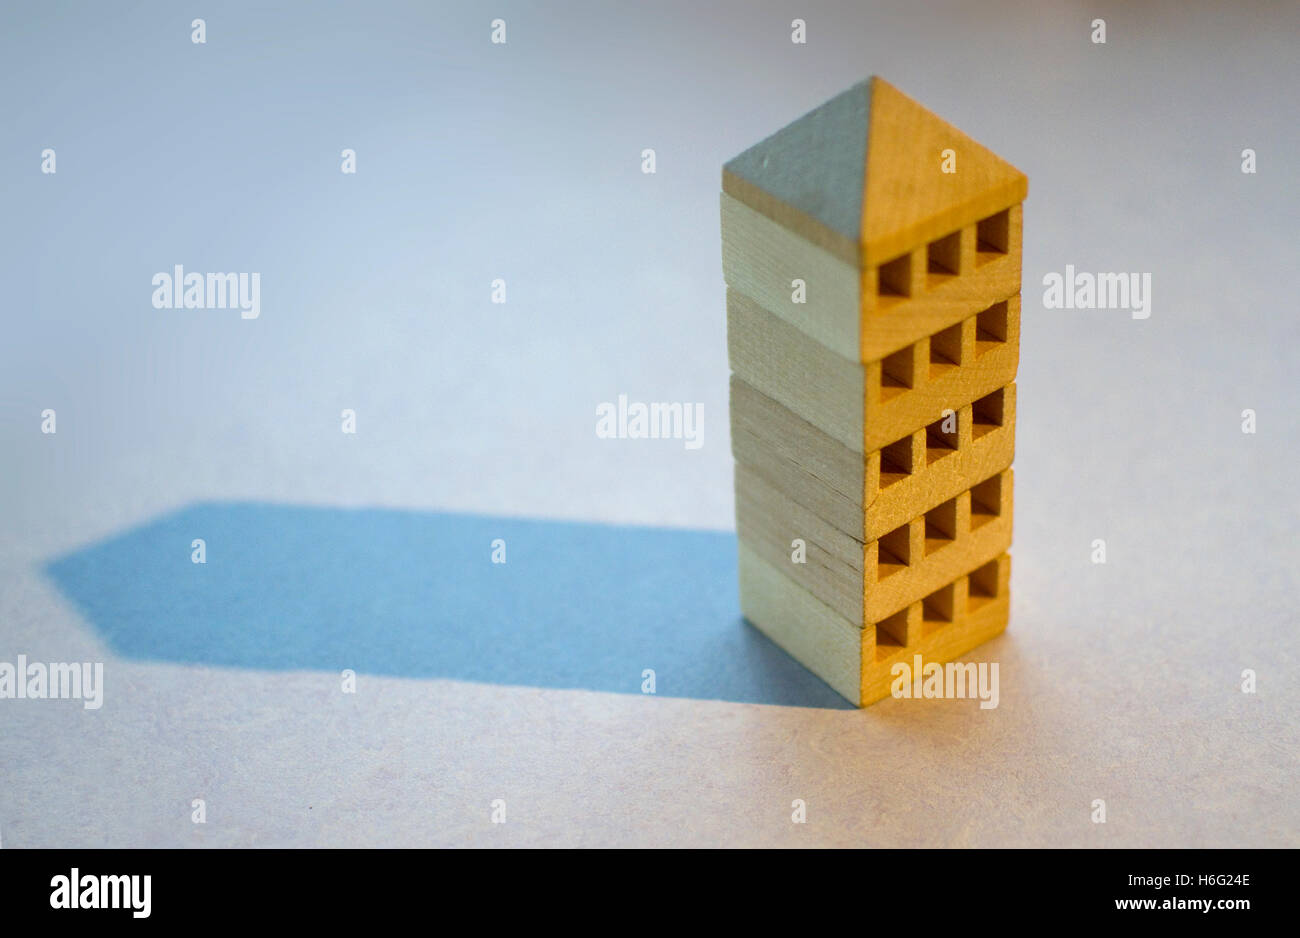 Wooden blocks representing a tower block like building. Stock Photo